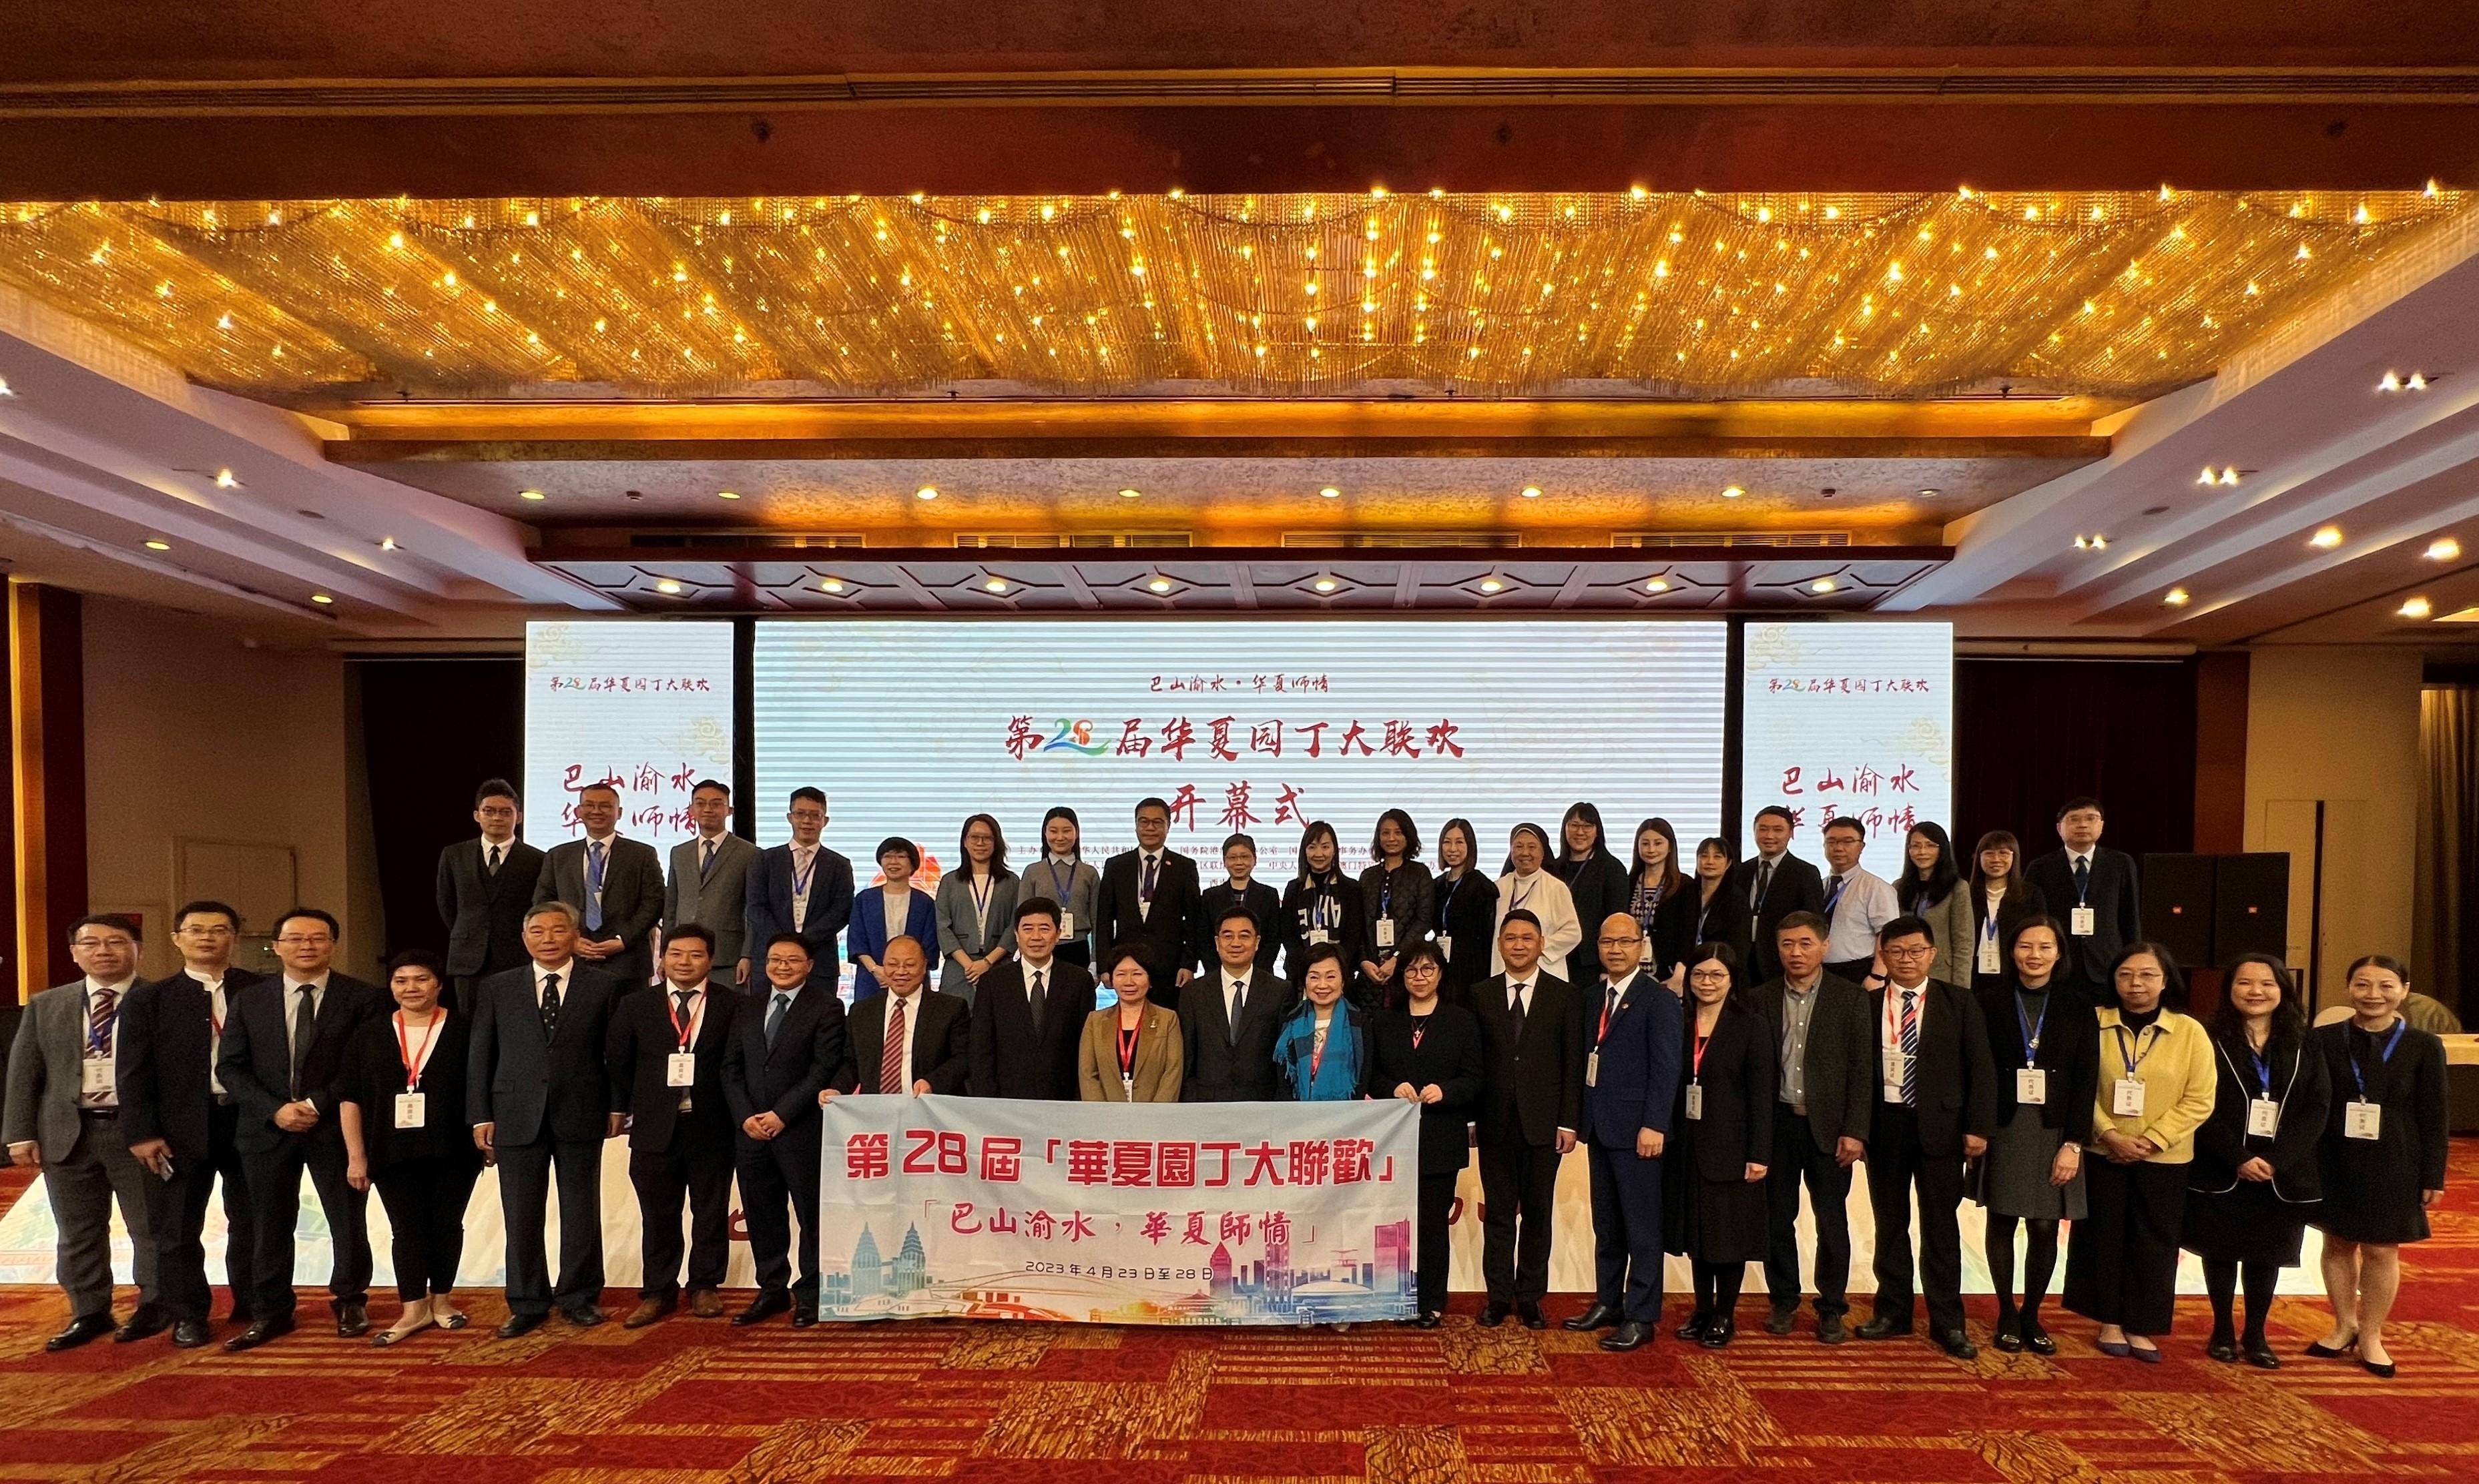 The Secretary for Education, Dr Choi Yuk-lin, yesterday (April 24) led a delegation to attend the Gala for Gardeners of Chinese Nation organised by the Ministry of Education (MOE) in Chongqing. Photo shows Dr Choi (front row, 12th left) with the Director of the Office of Hong Kong, Macao and Taiwan Affairs of the MOE, Ms Liu Jin (front row, 10th left); the Secretary of the Education Working Committee of the CPC Chongqing Municipal Committee, Mr Liu Yanbing (front row, 11th left); the Secretary of the Party Committee of Chongqing University, Mr Shu Lichun (front row, ninth left), and members of the Hong Kong delegation at the opening ceremony. 